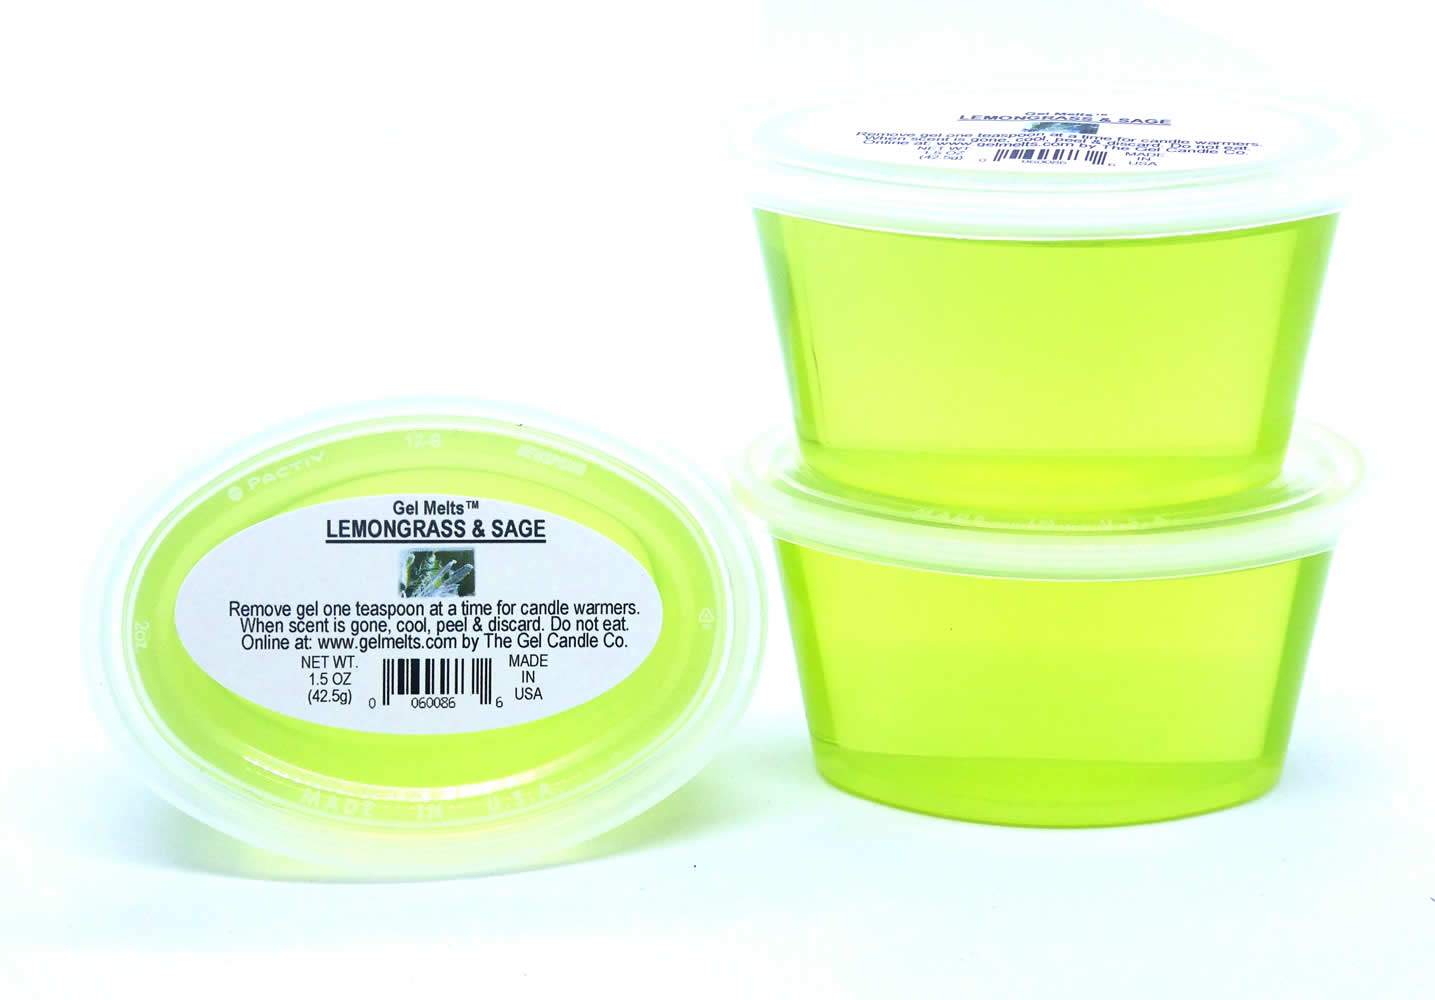 Lemongrass scented Gel Melts™ Gel Wax for warmers - 3 pack - Click Image to Close